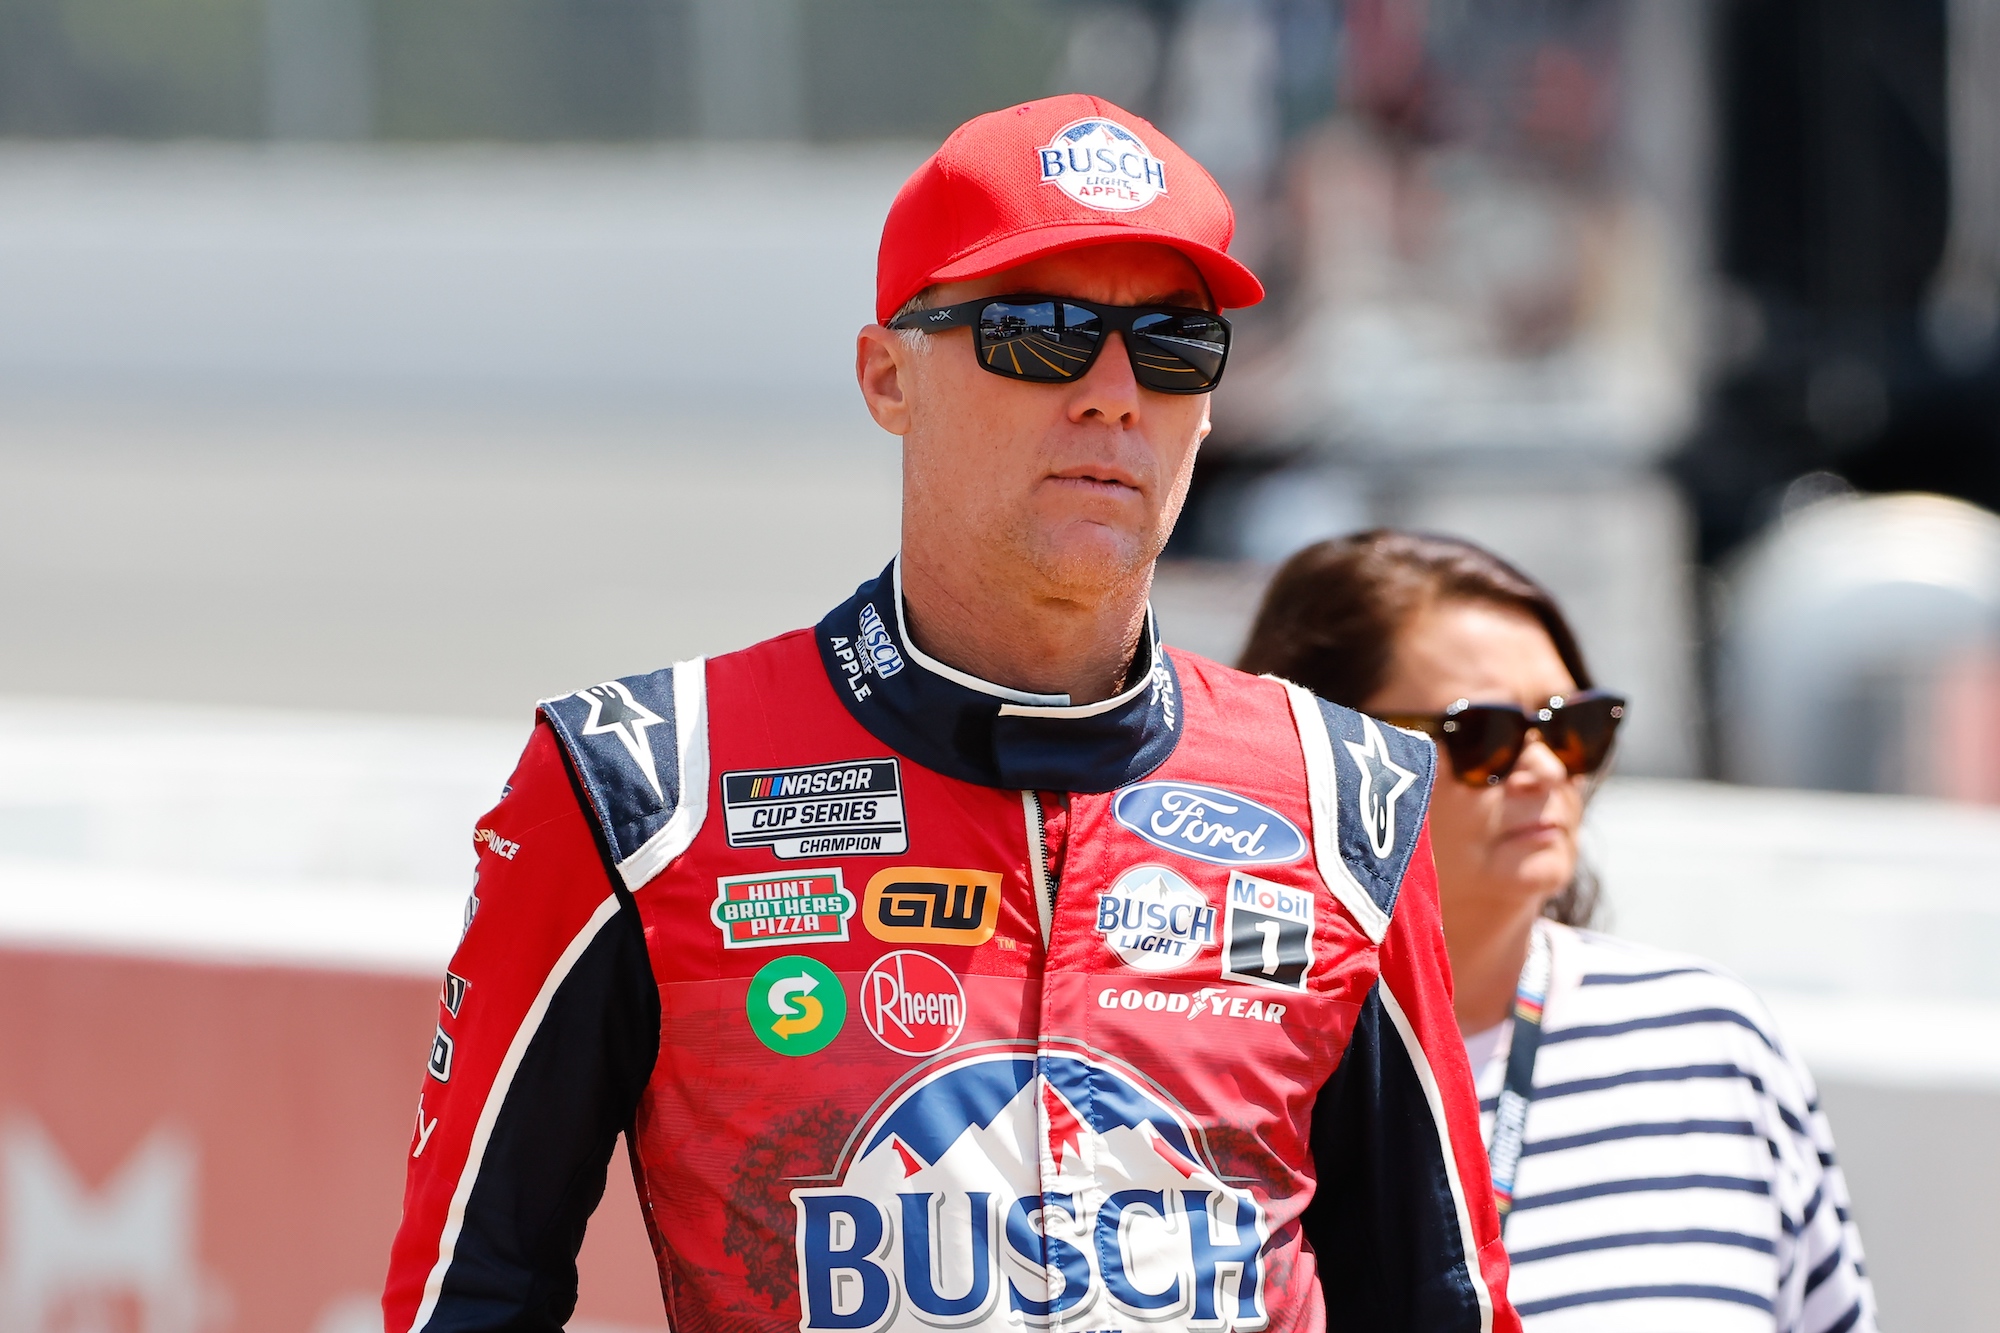 Kevin Harvick Reflects Back on Career and Has 1 Painful Thing He Would Change